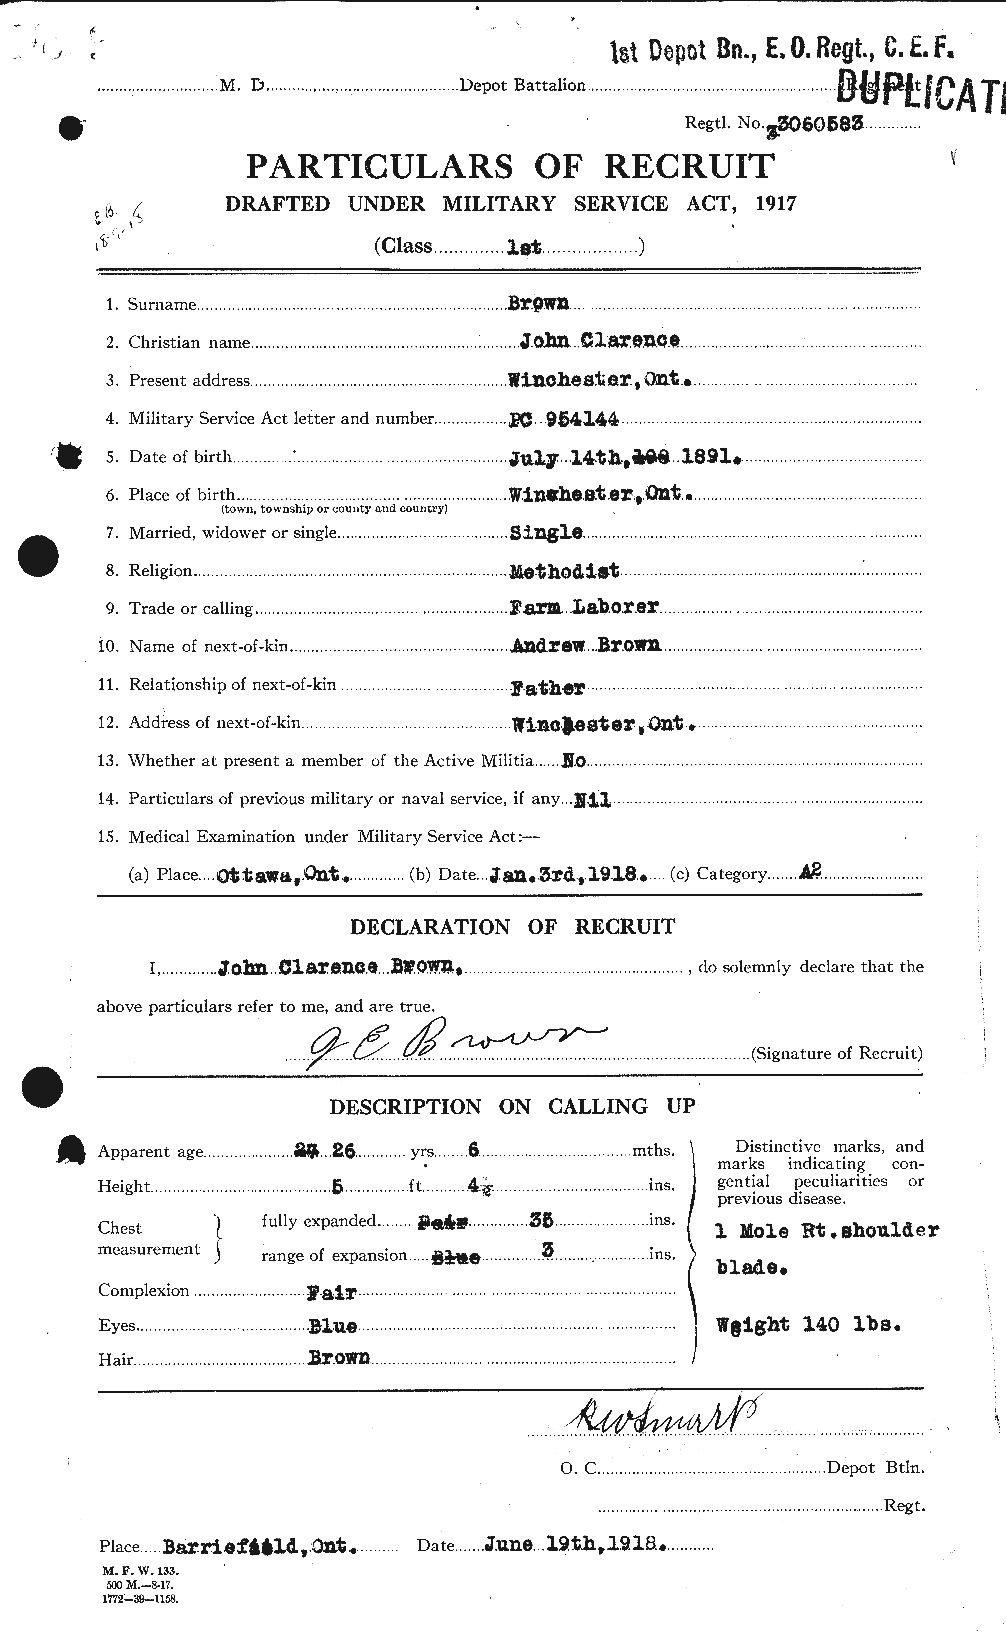 Personnel Records of the First World War - CEF 264579a